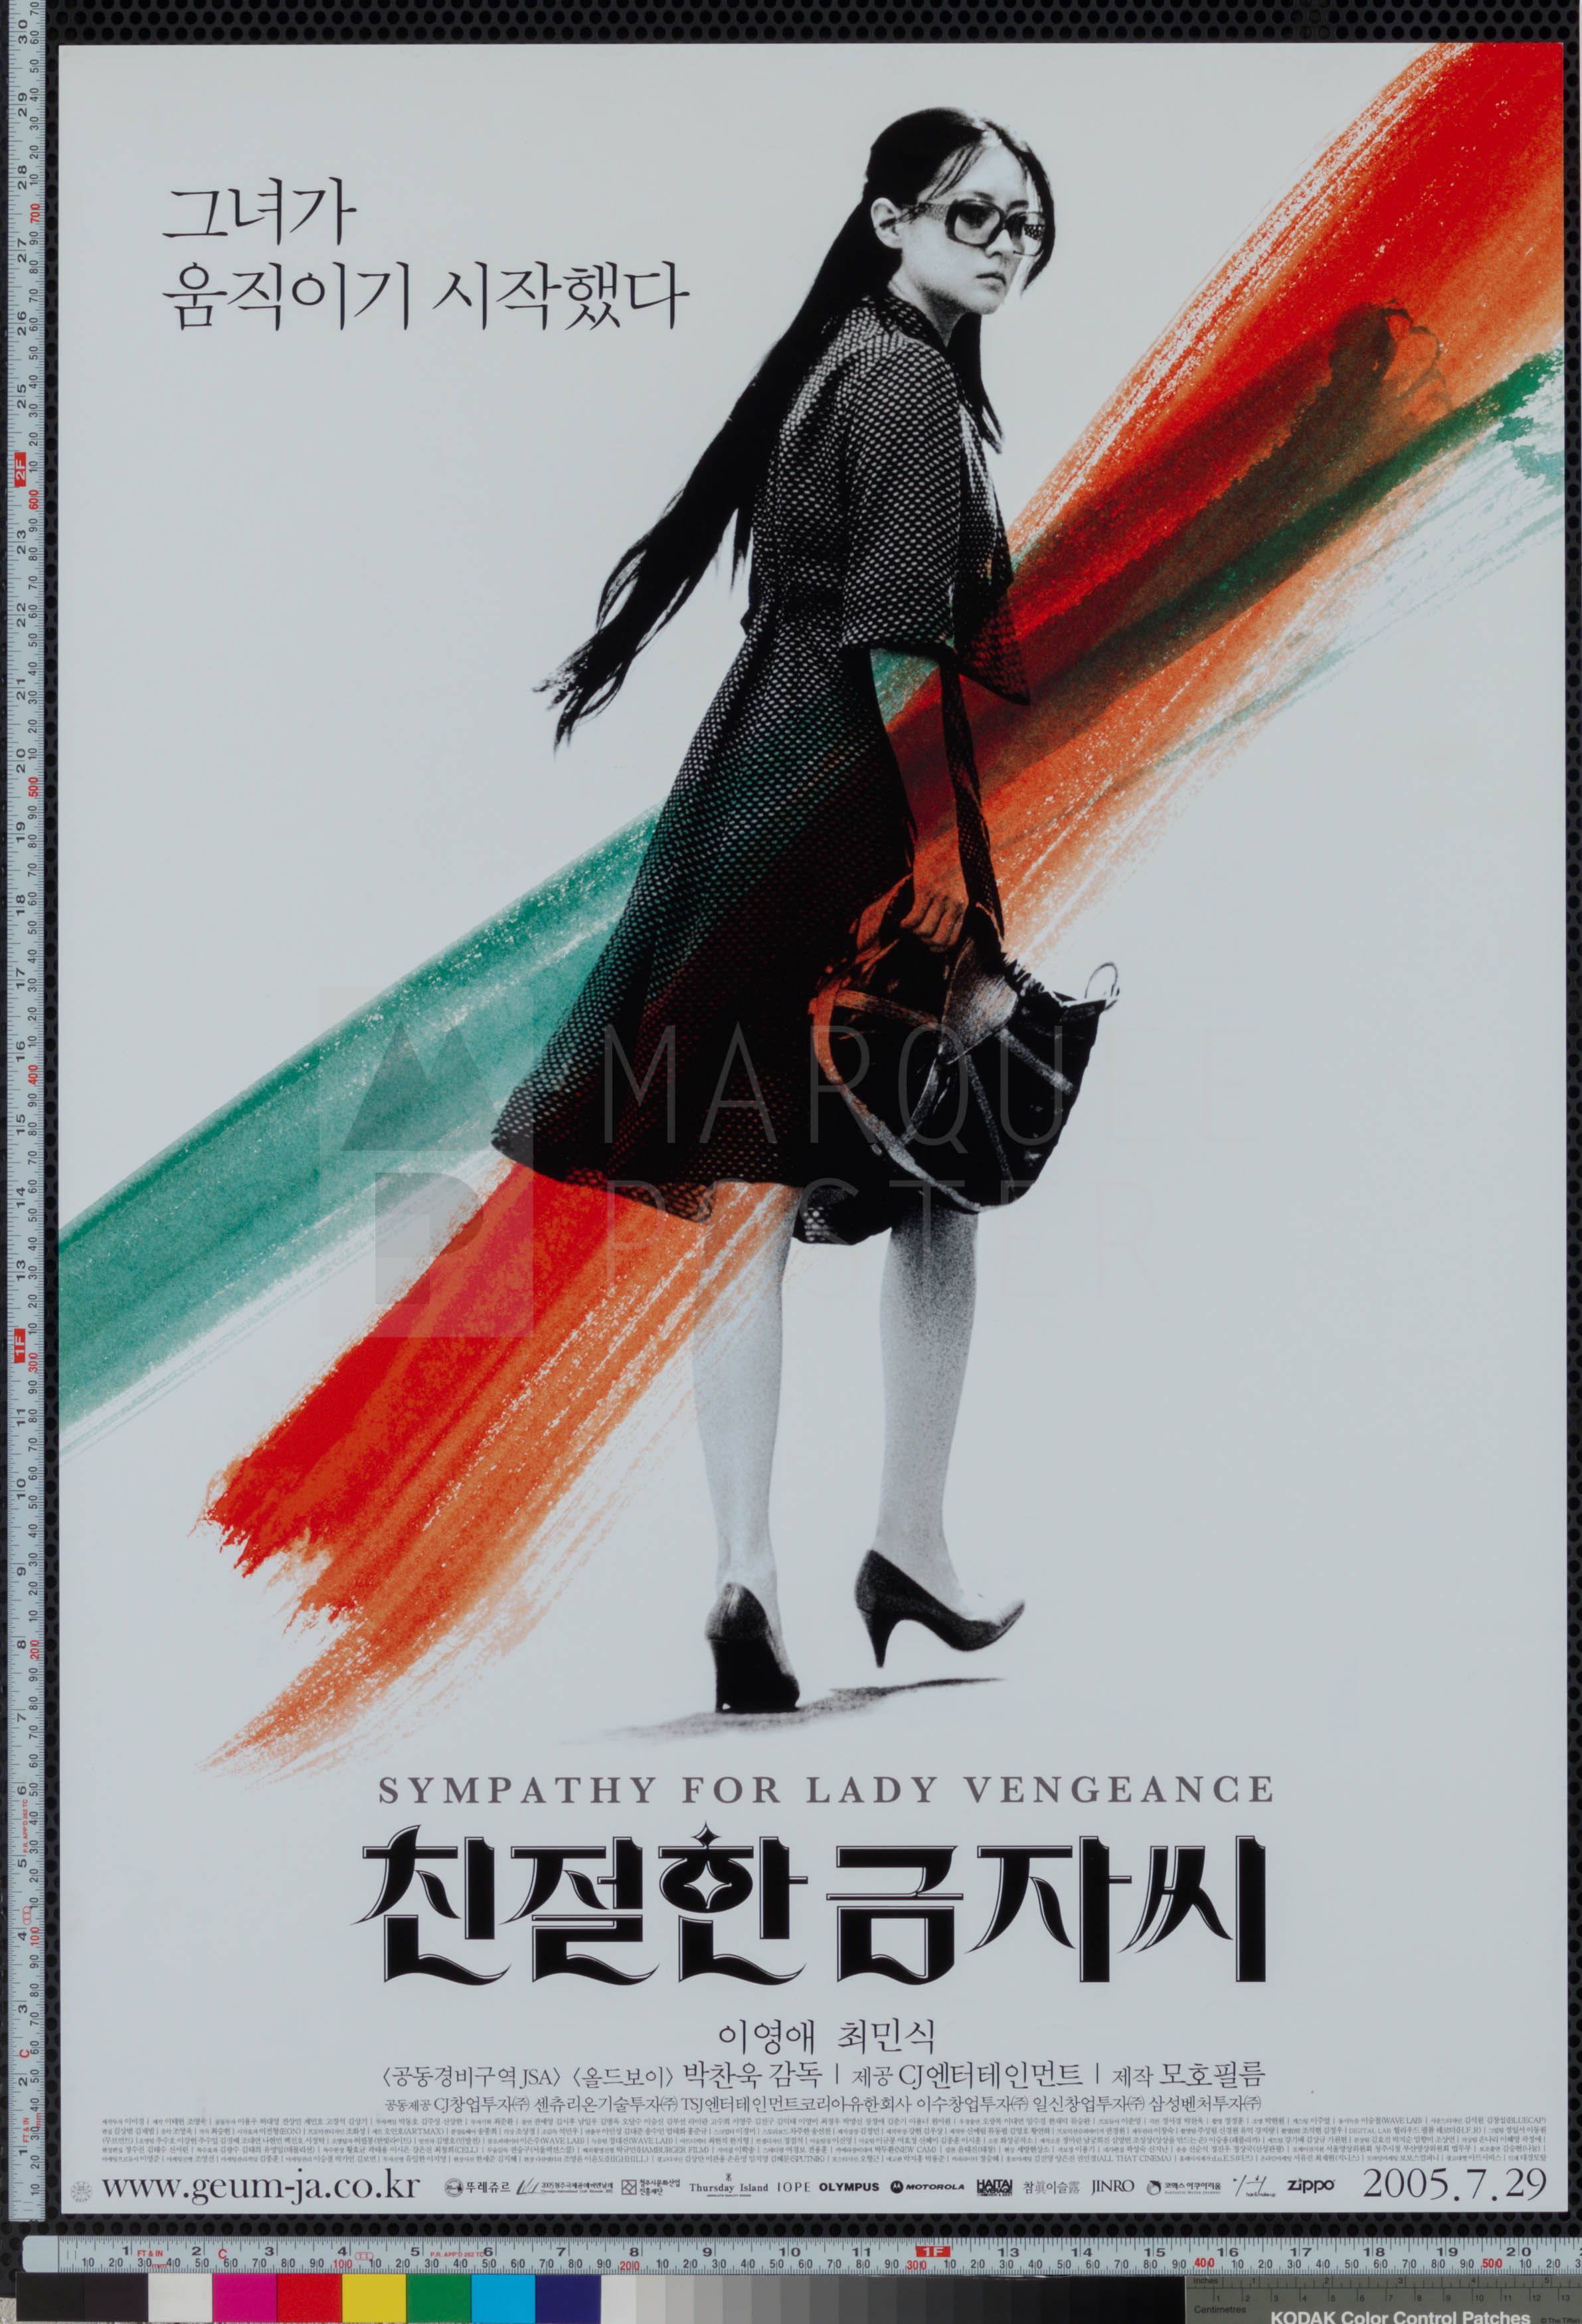 12-sympathy-for-lady-vengeance-white-background-style-south-korean-b2-2005-02-22